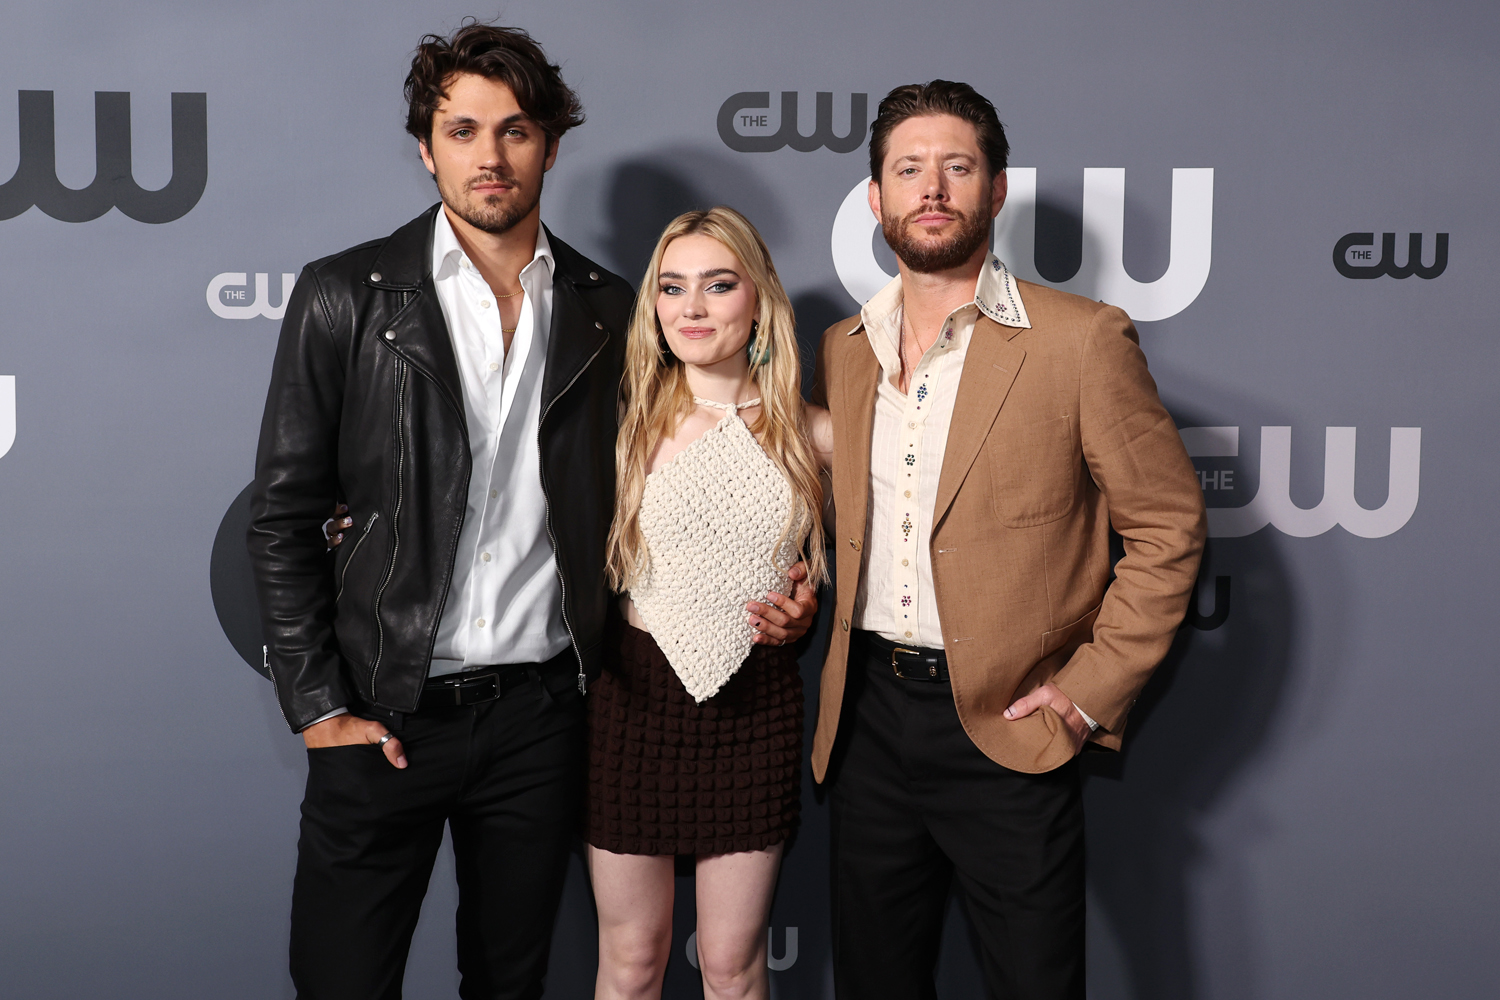 Meg Donnelly Hopes Supernatural Prequel Lives Up to Fans' Expectations: 'We Know How Much It Means'